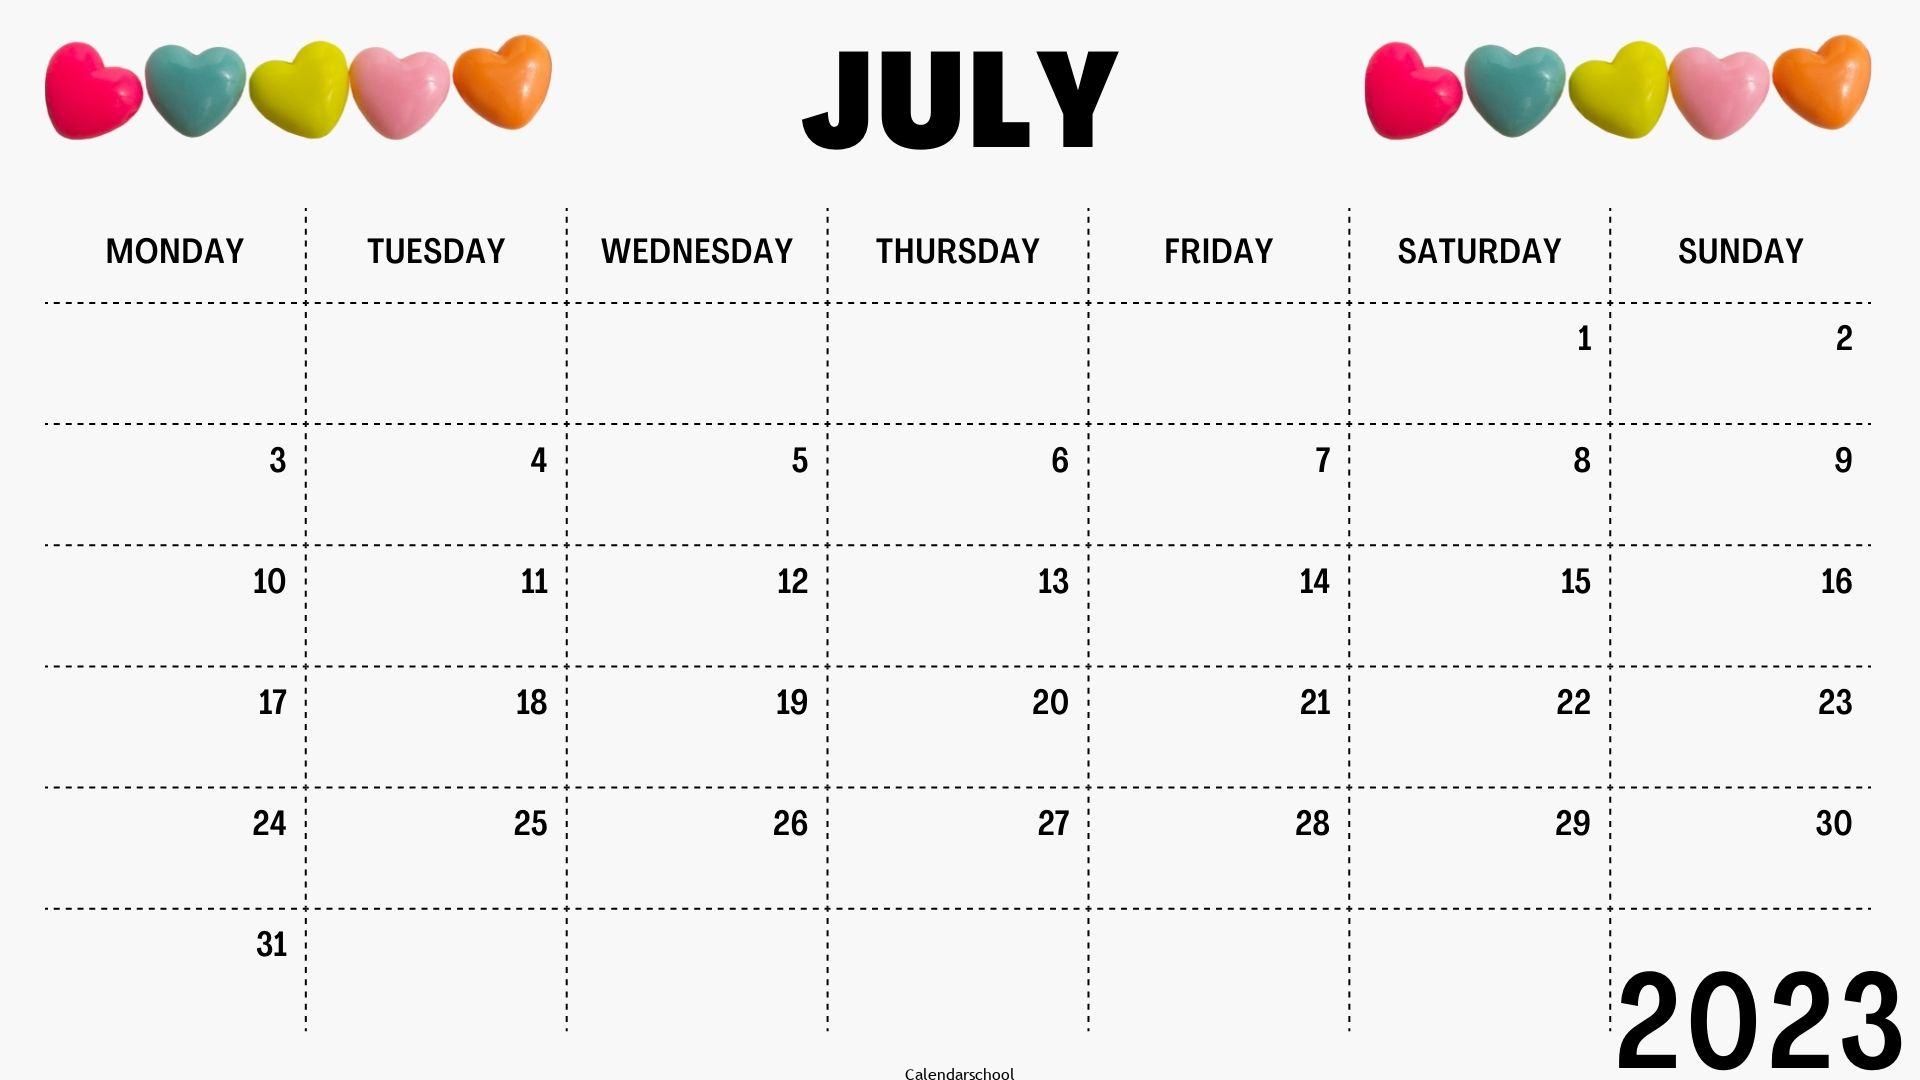 July 2023 Calendar With Festivals